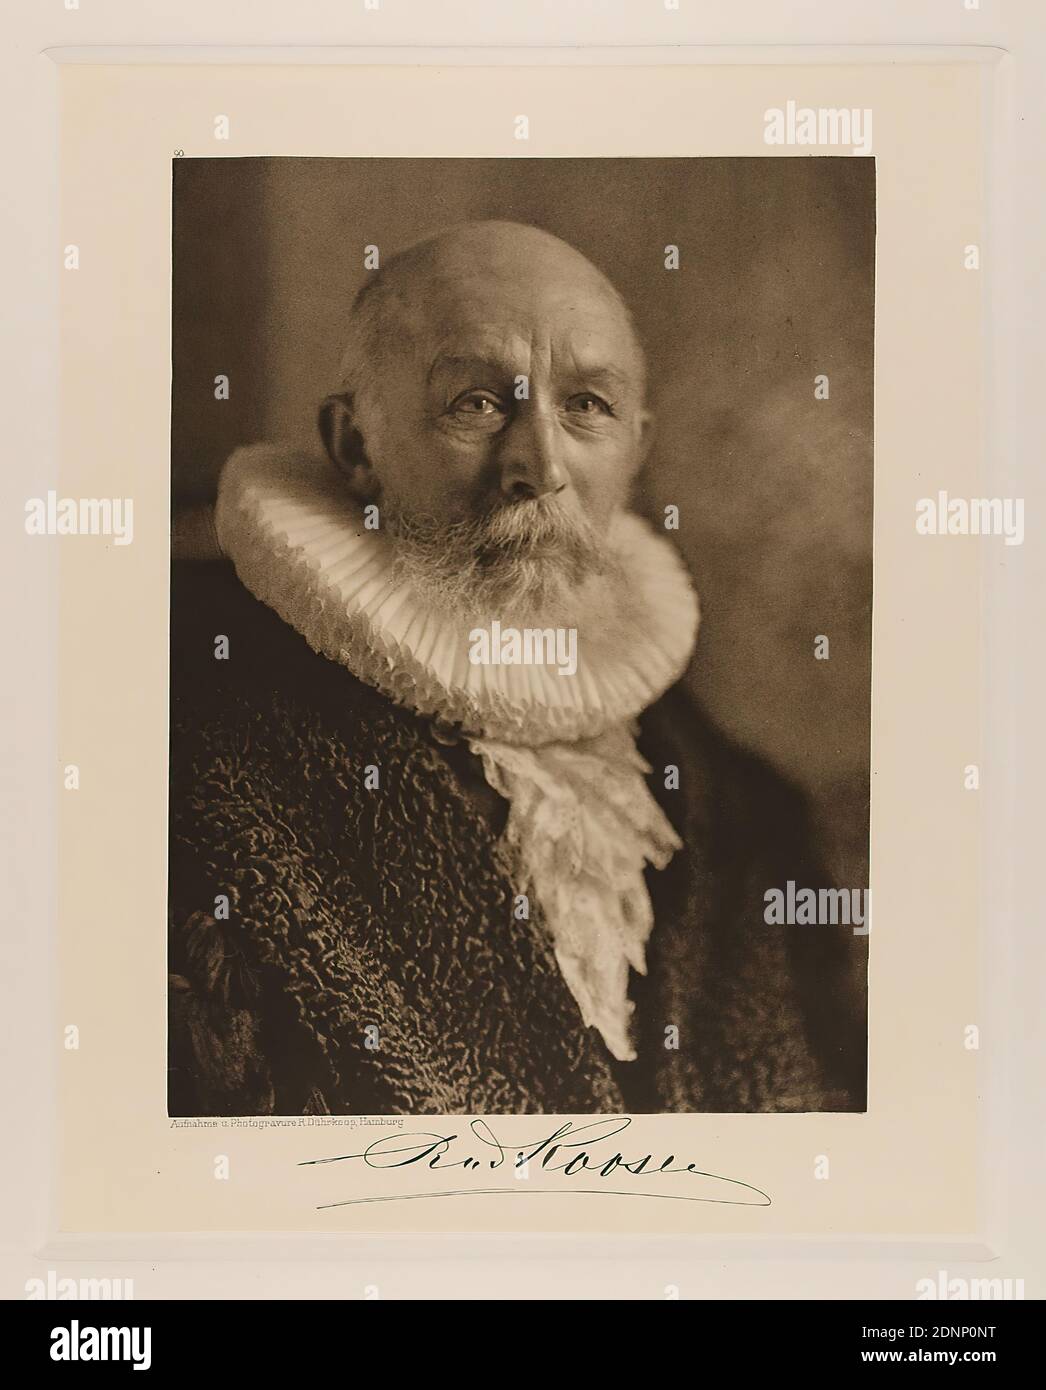 Rudolph Dührkoop, Senator Rudolph Roosen from the portfolio Hamburgische Männer und Frauen am Anfang des XX. Jahrhunderts, Staatliche Landesbildstelle Hamburg, collection on the history of photography, paper, heliogravure, image size: height: 21,30 cm; width: 15,50 cm, signed: recto below the image: Exposed signature of the sitter, inscribed: recto: engraved on printing plate, below the image: photograph and photogravure R. Dührkoop, Hamburg, top left above the picture 90; top right in the corner in lead: 11, stamp: recto: inventory stamp of the State Picture Center Hamburg, handwritten Stock Photo